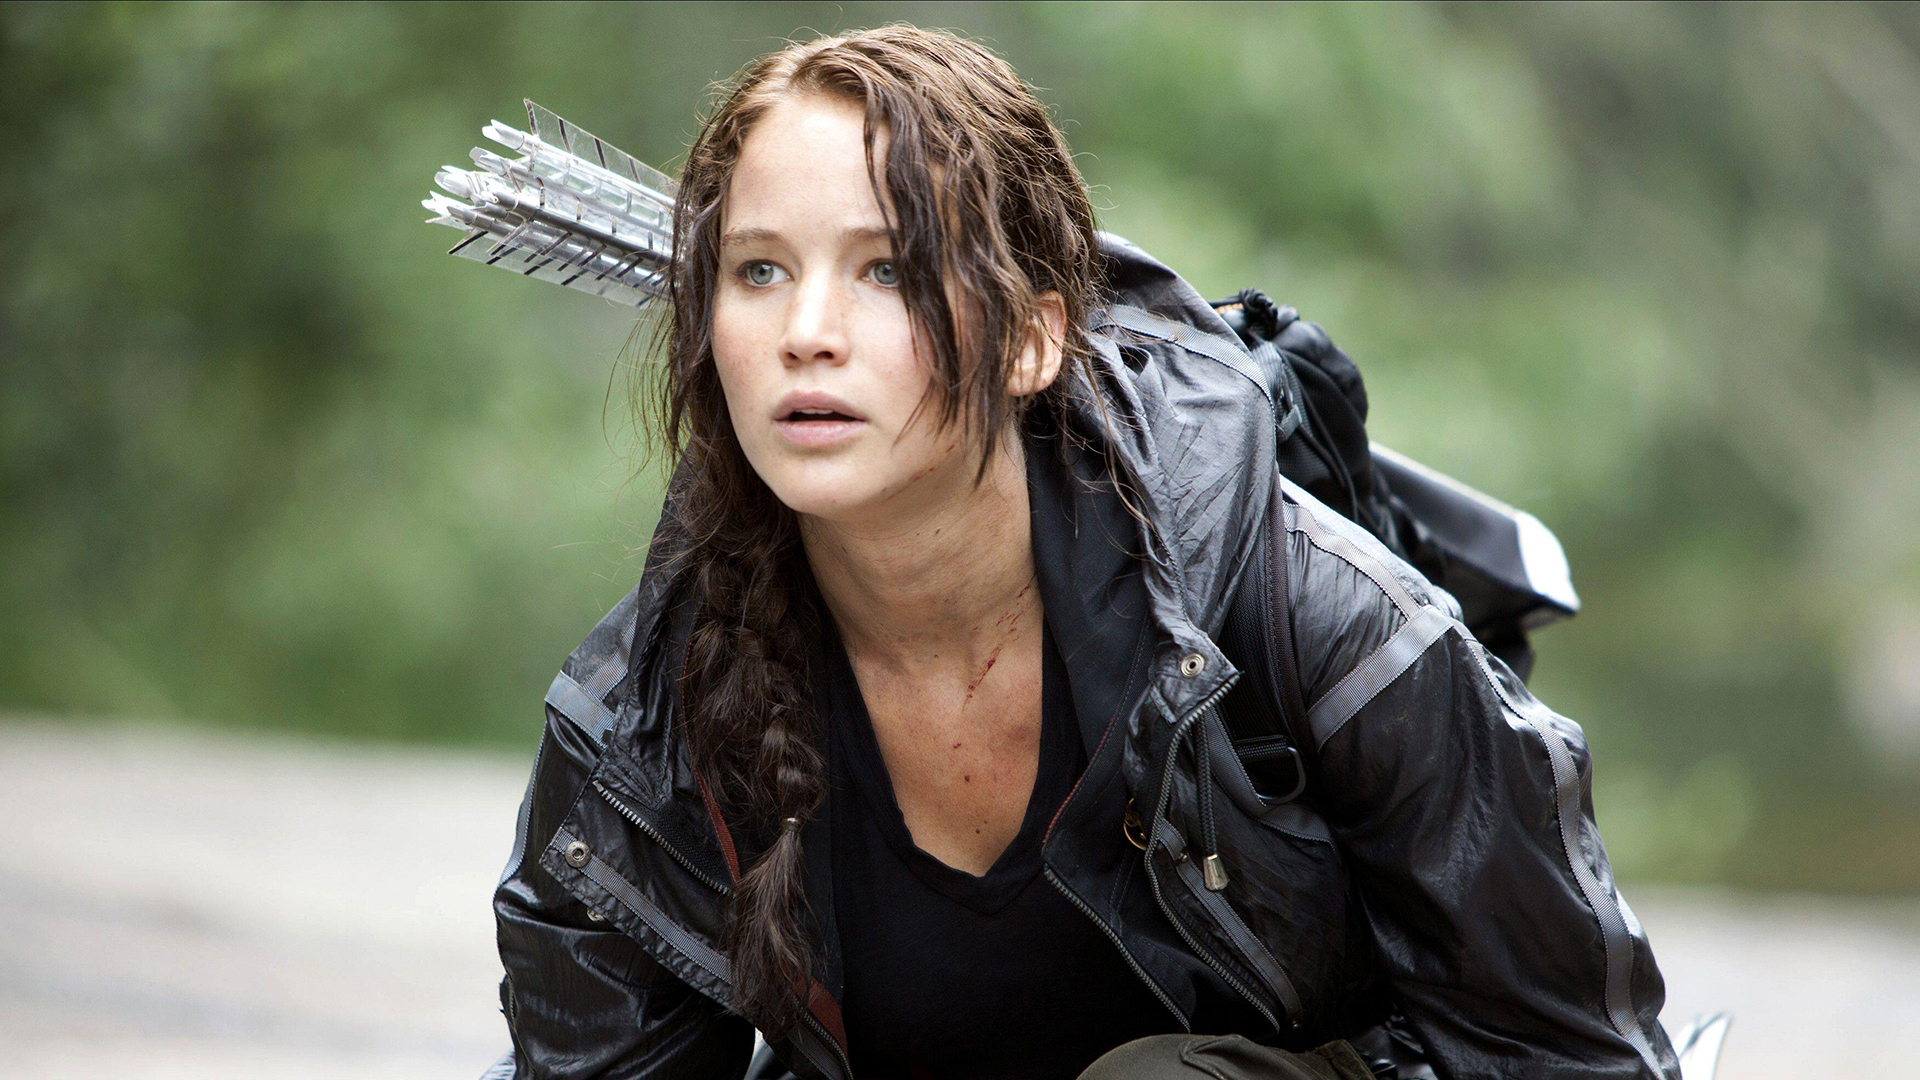 8 Movies Like Hunger Games to Watch Ahead of the Prequel Premiere